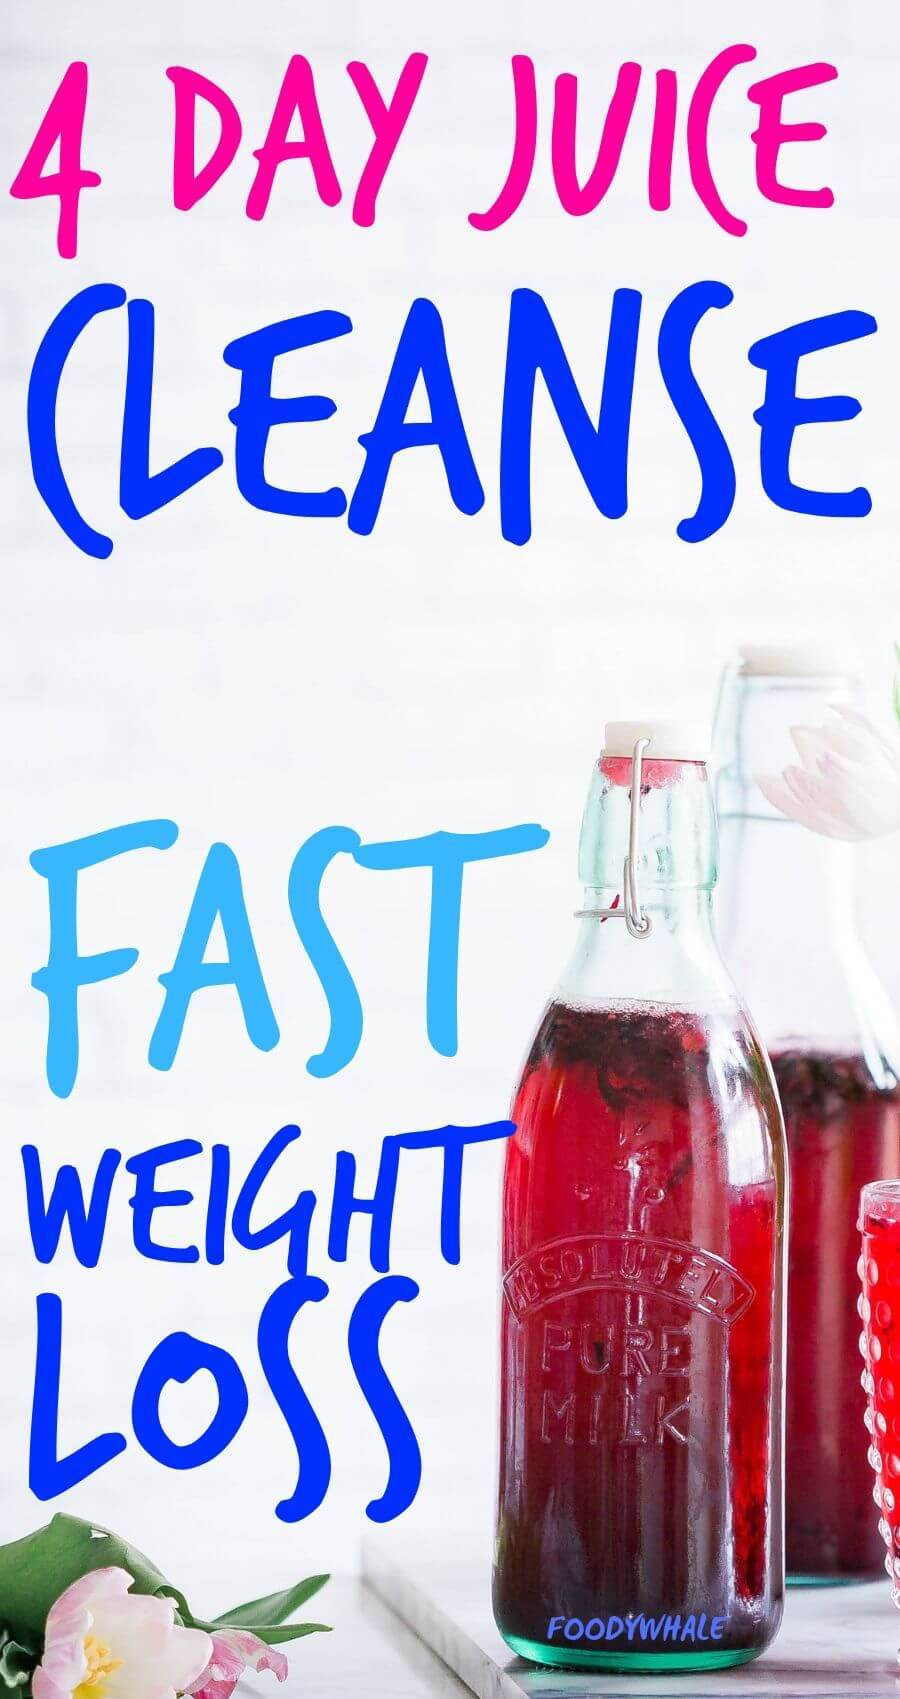 Quick Weight Loss Cleanse
 4 Day Juice Cleanse for Fast Weight Loss